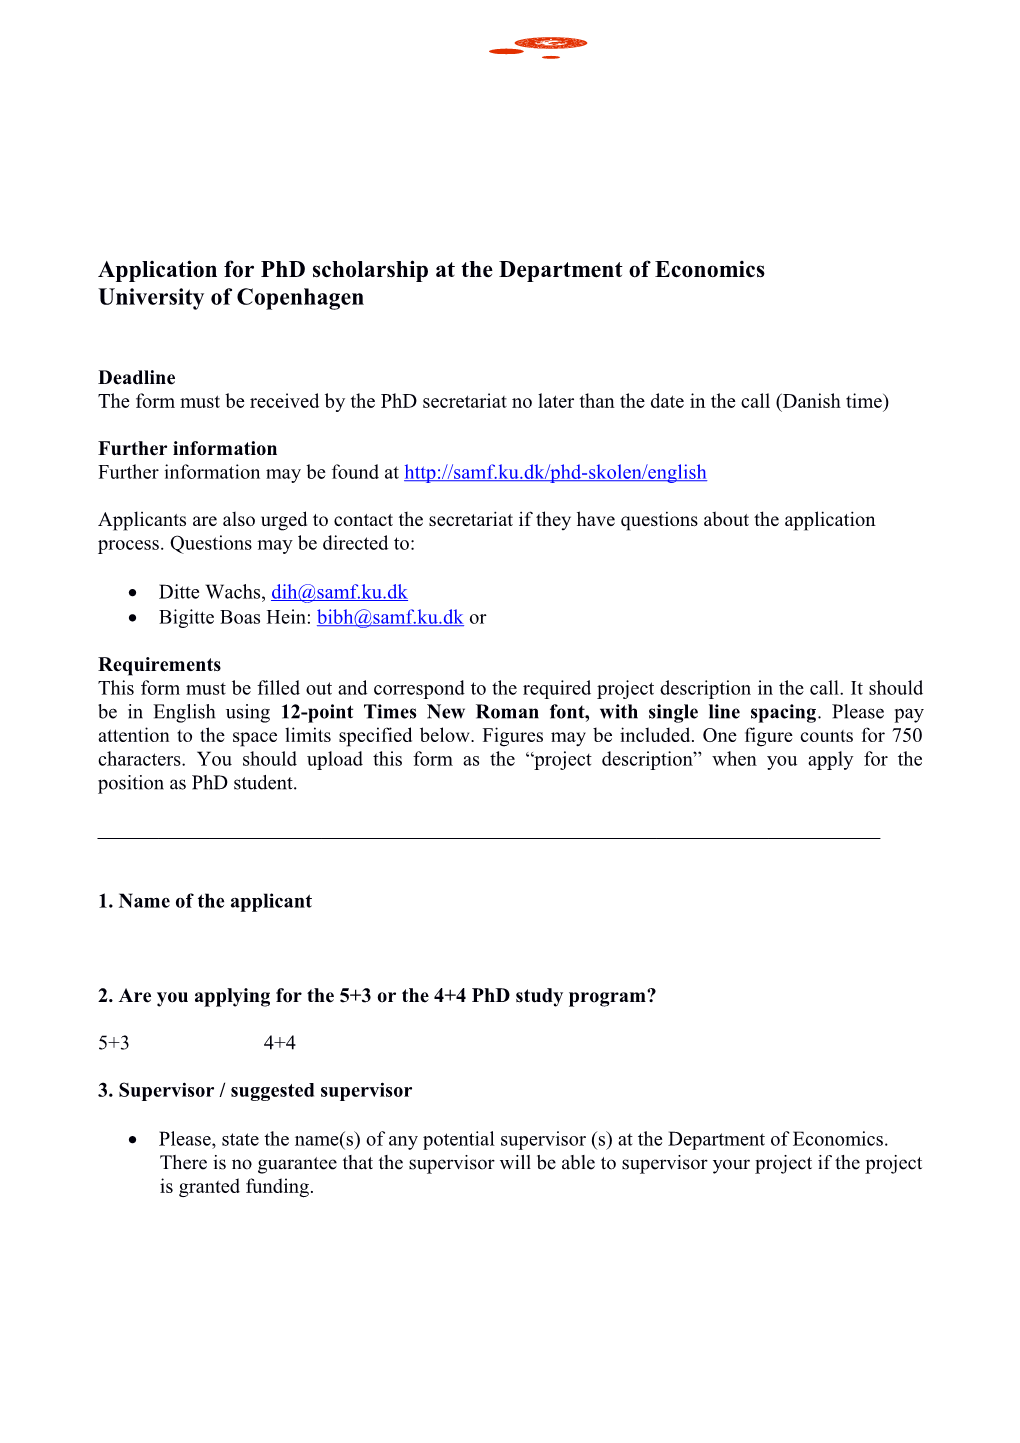 Application for Phd Scholarship at the Department of Economics